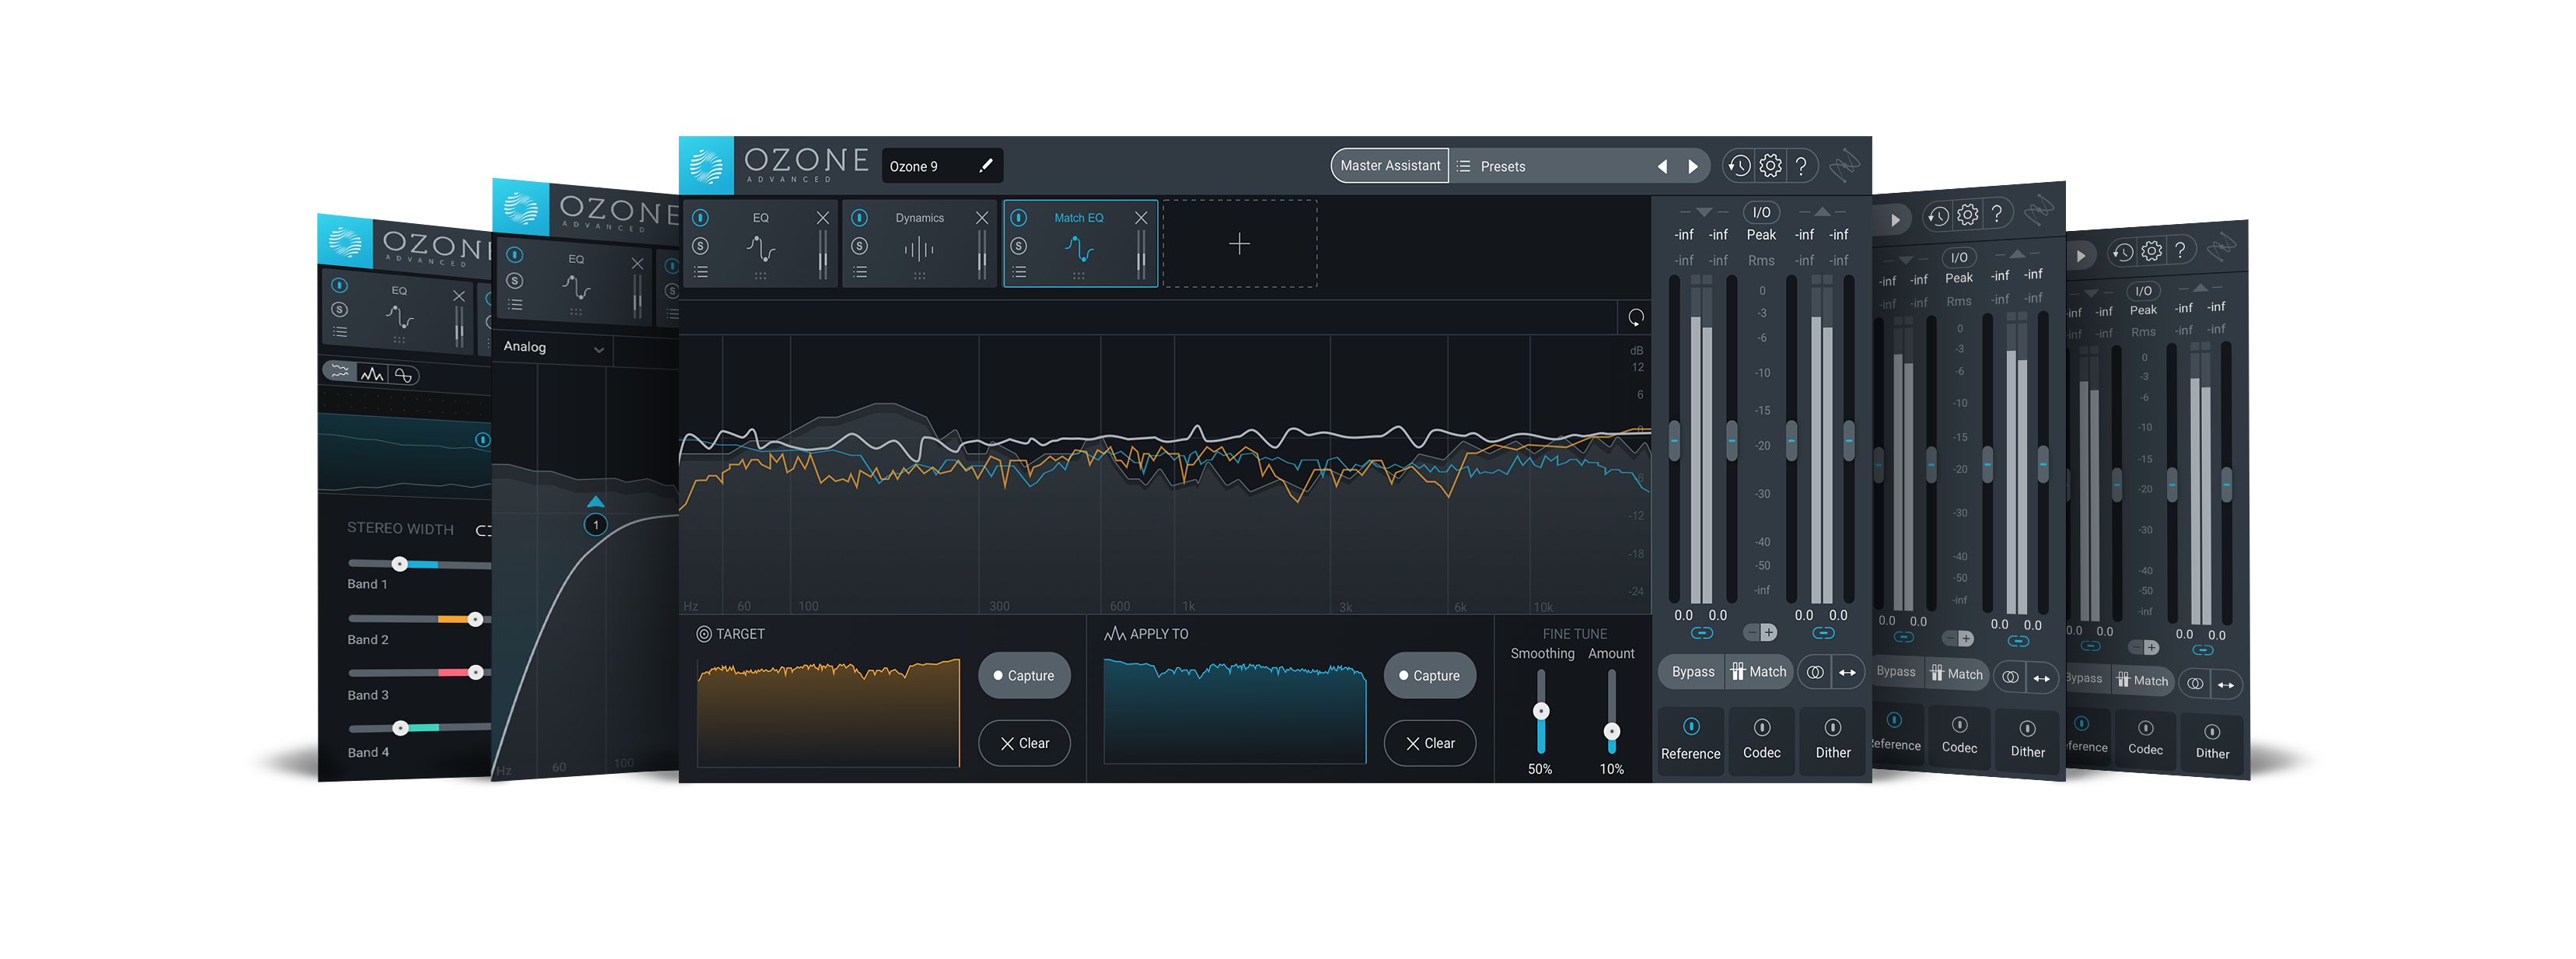 free iZotope Tonal Balance Control 2.7.0 for iphone download